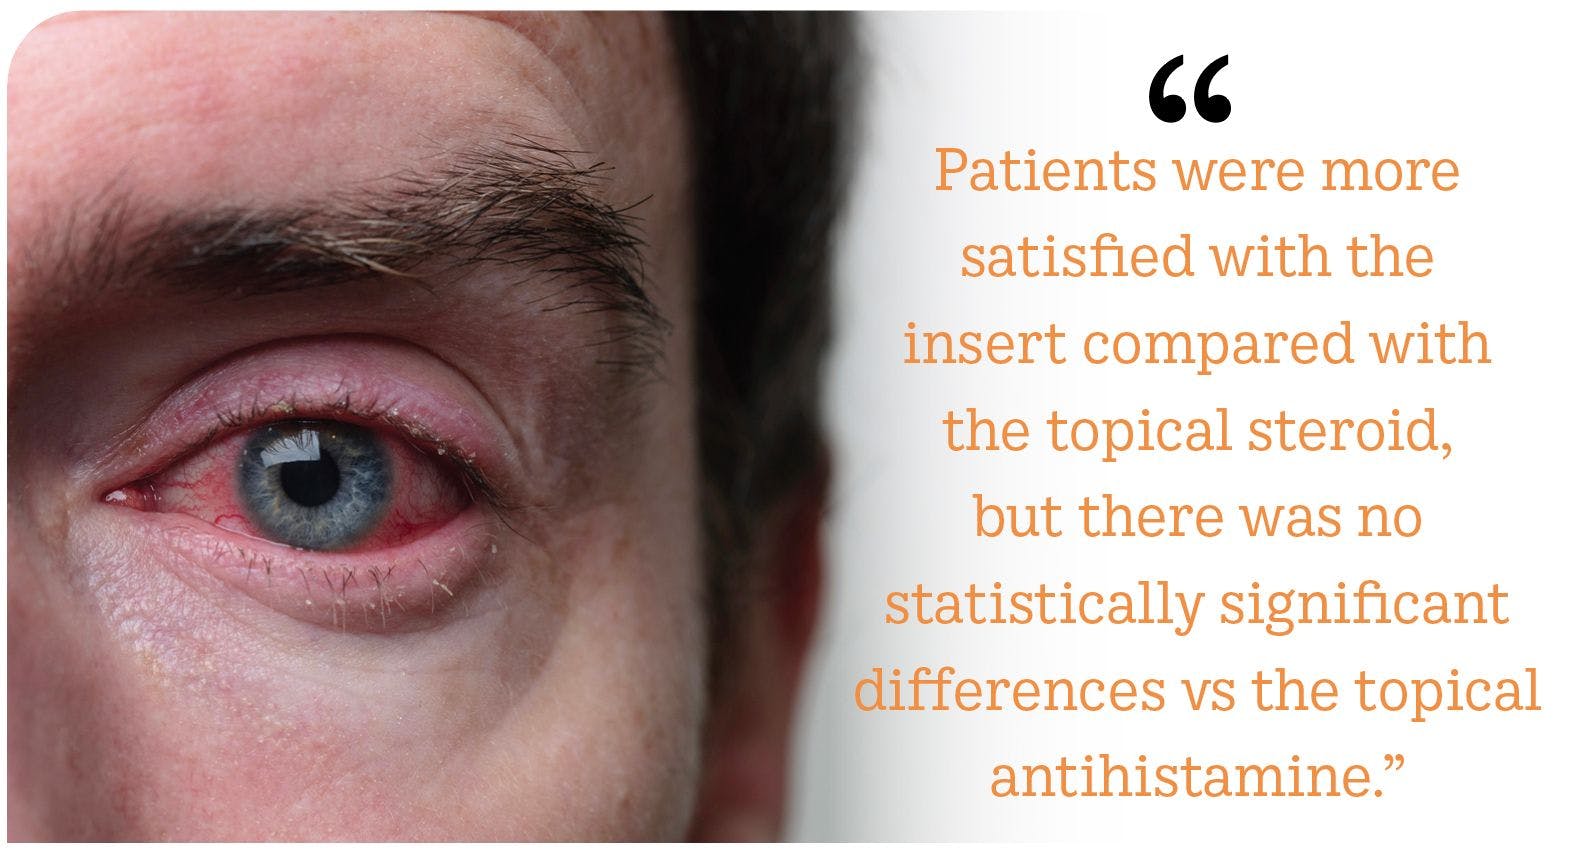 Patients were more satisfied with the insert compared with the topical steroid, but there was no statistically significant differences vs the topical antihistamine.